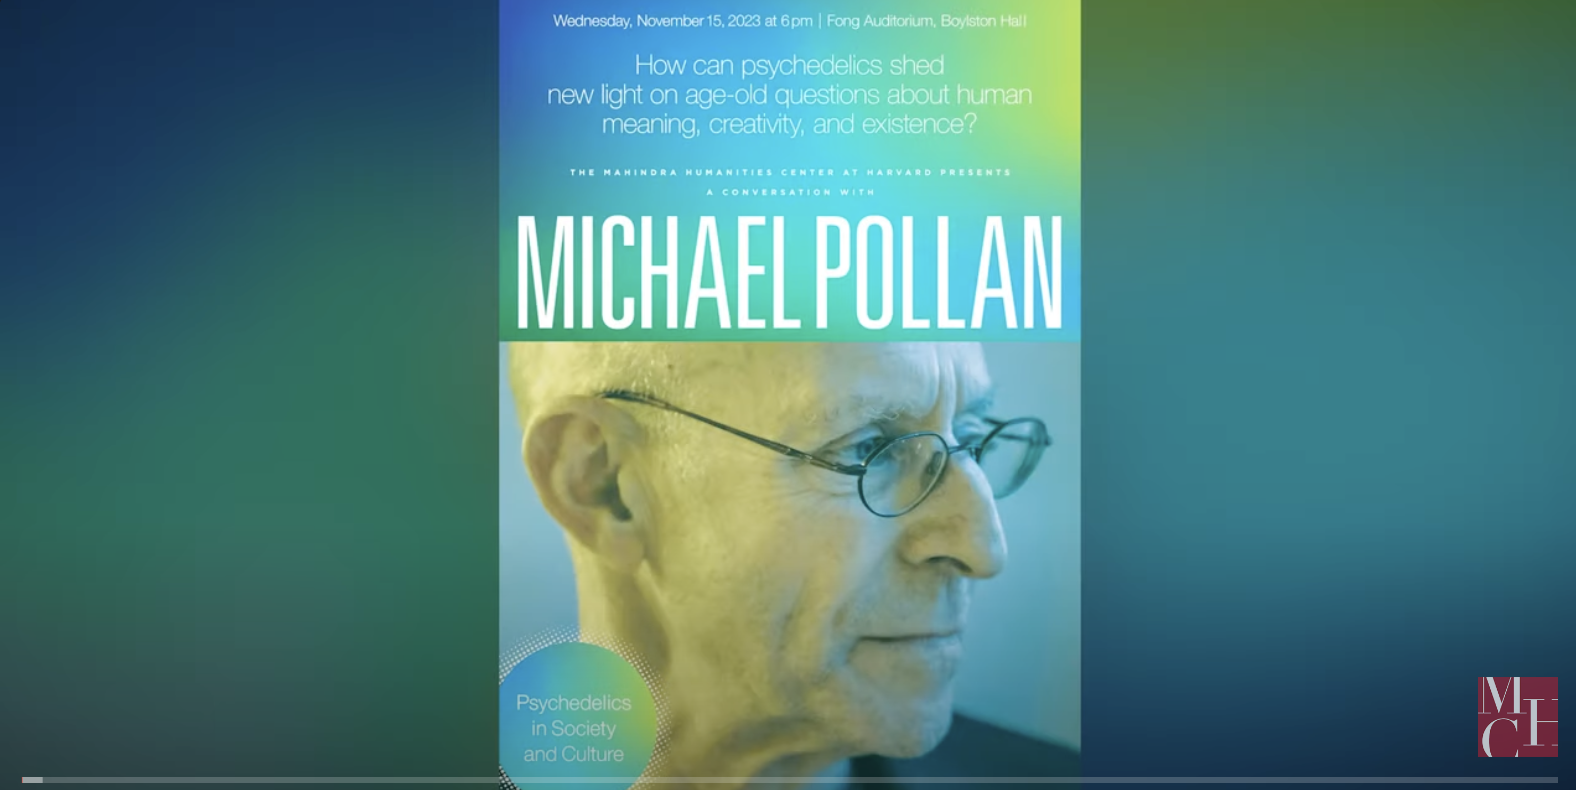 Michael Pollan at Harvard: Psychedelics in Society and Culture